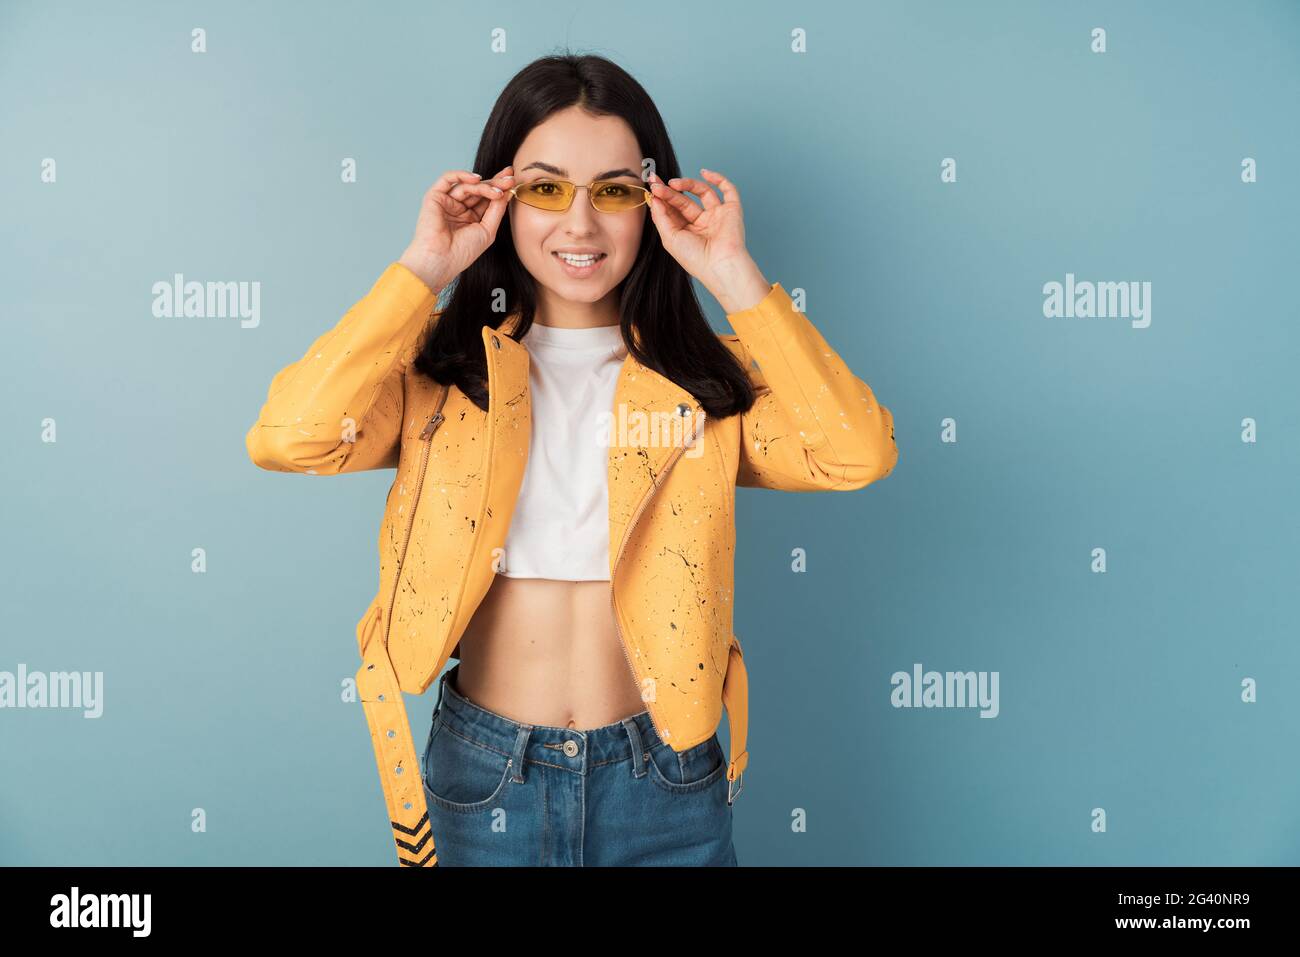 Positive girl adjusts sunglasses, she wears an orange casual jacket and blue jeans. Pretty lady on blank wall background, copy space, place for text. Stock Photo